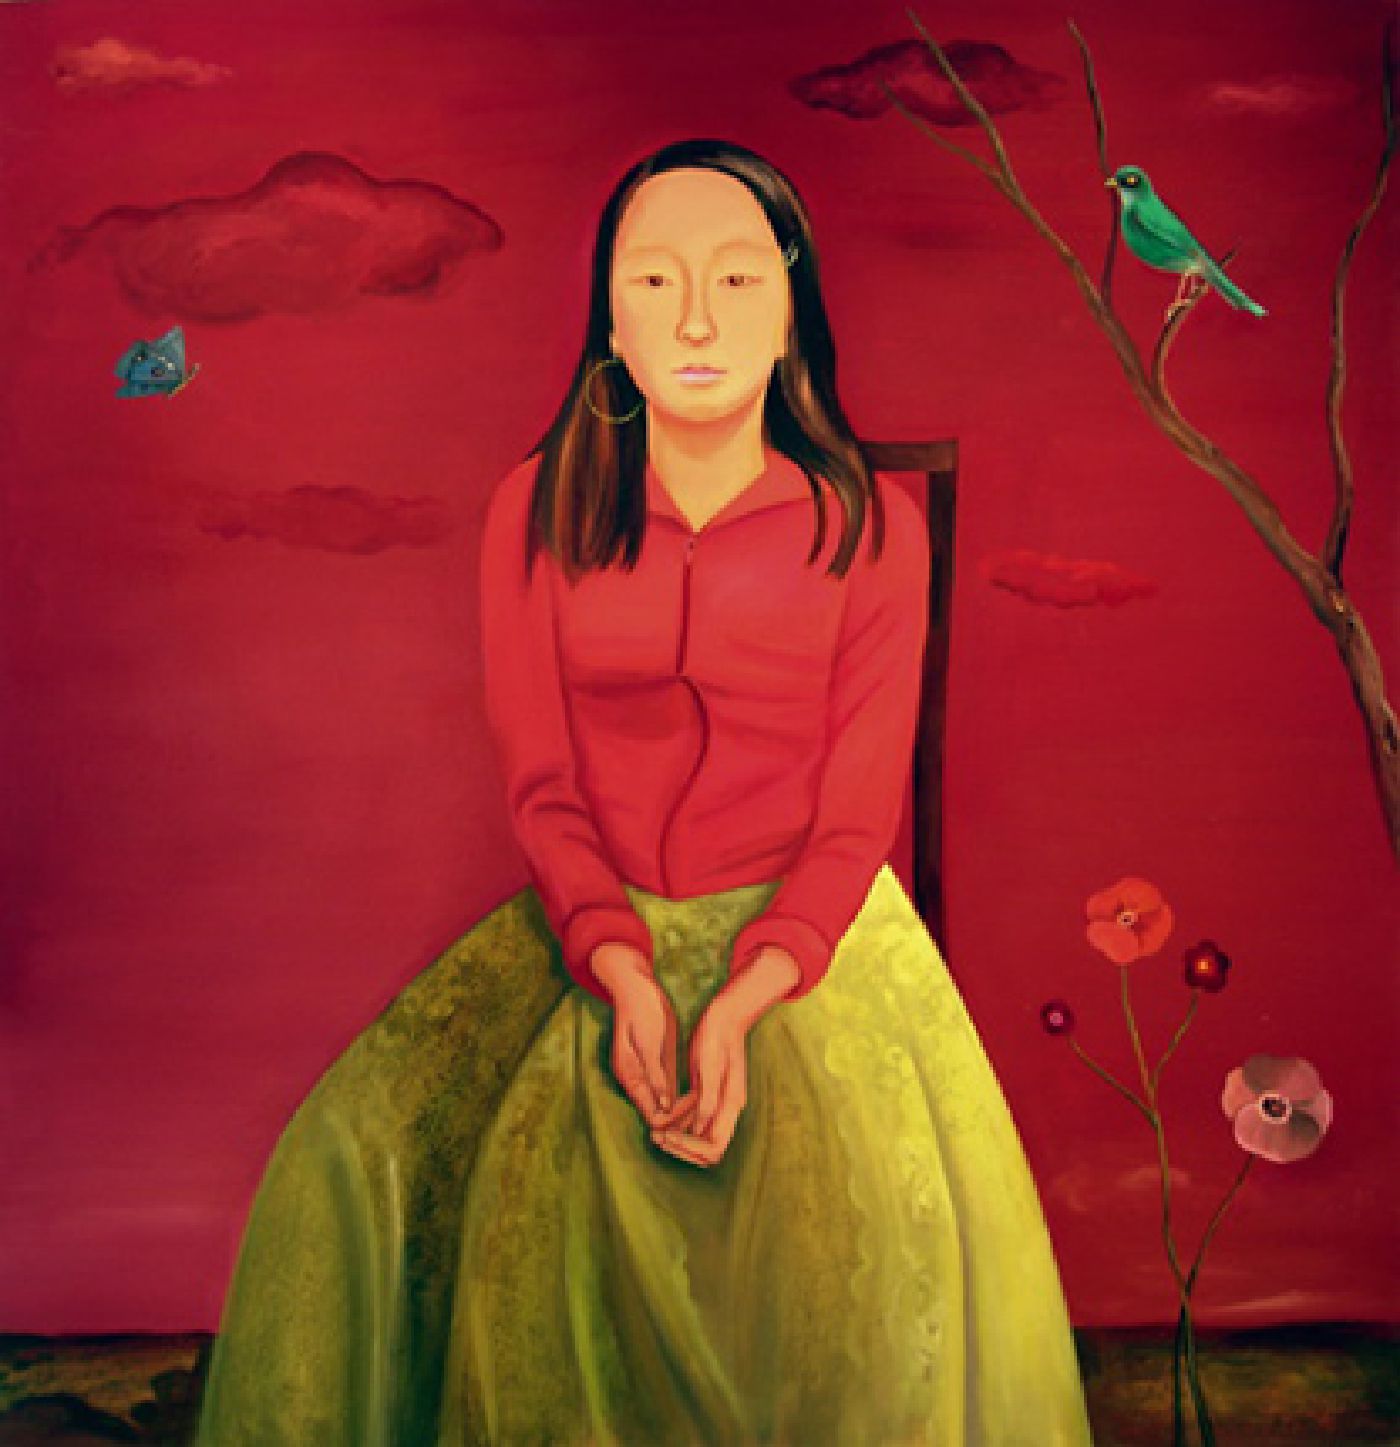 In a Colorful World (Girl with Red Sky and Green Skirt) - oil on canvas, 52 inches x 50 inches, 2009